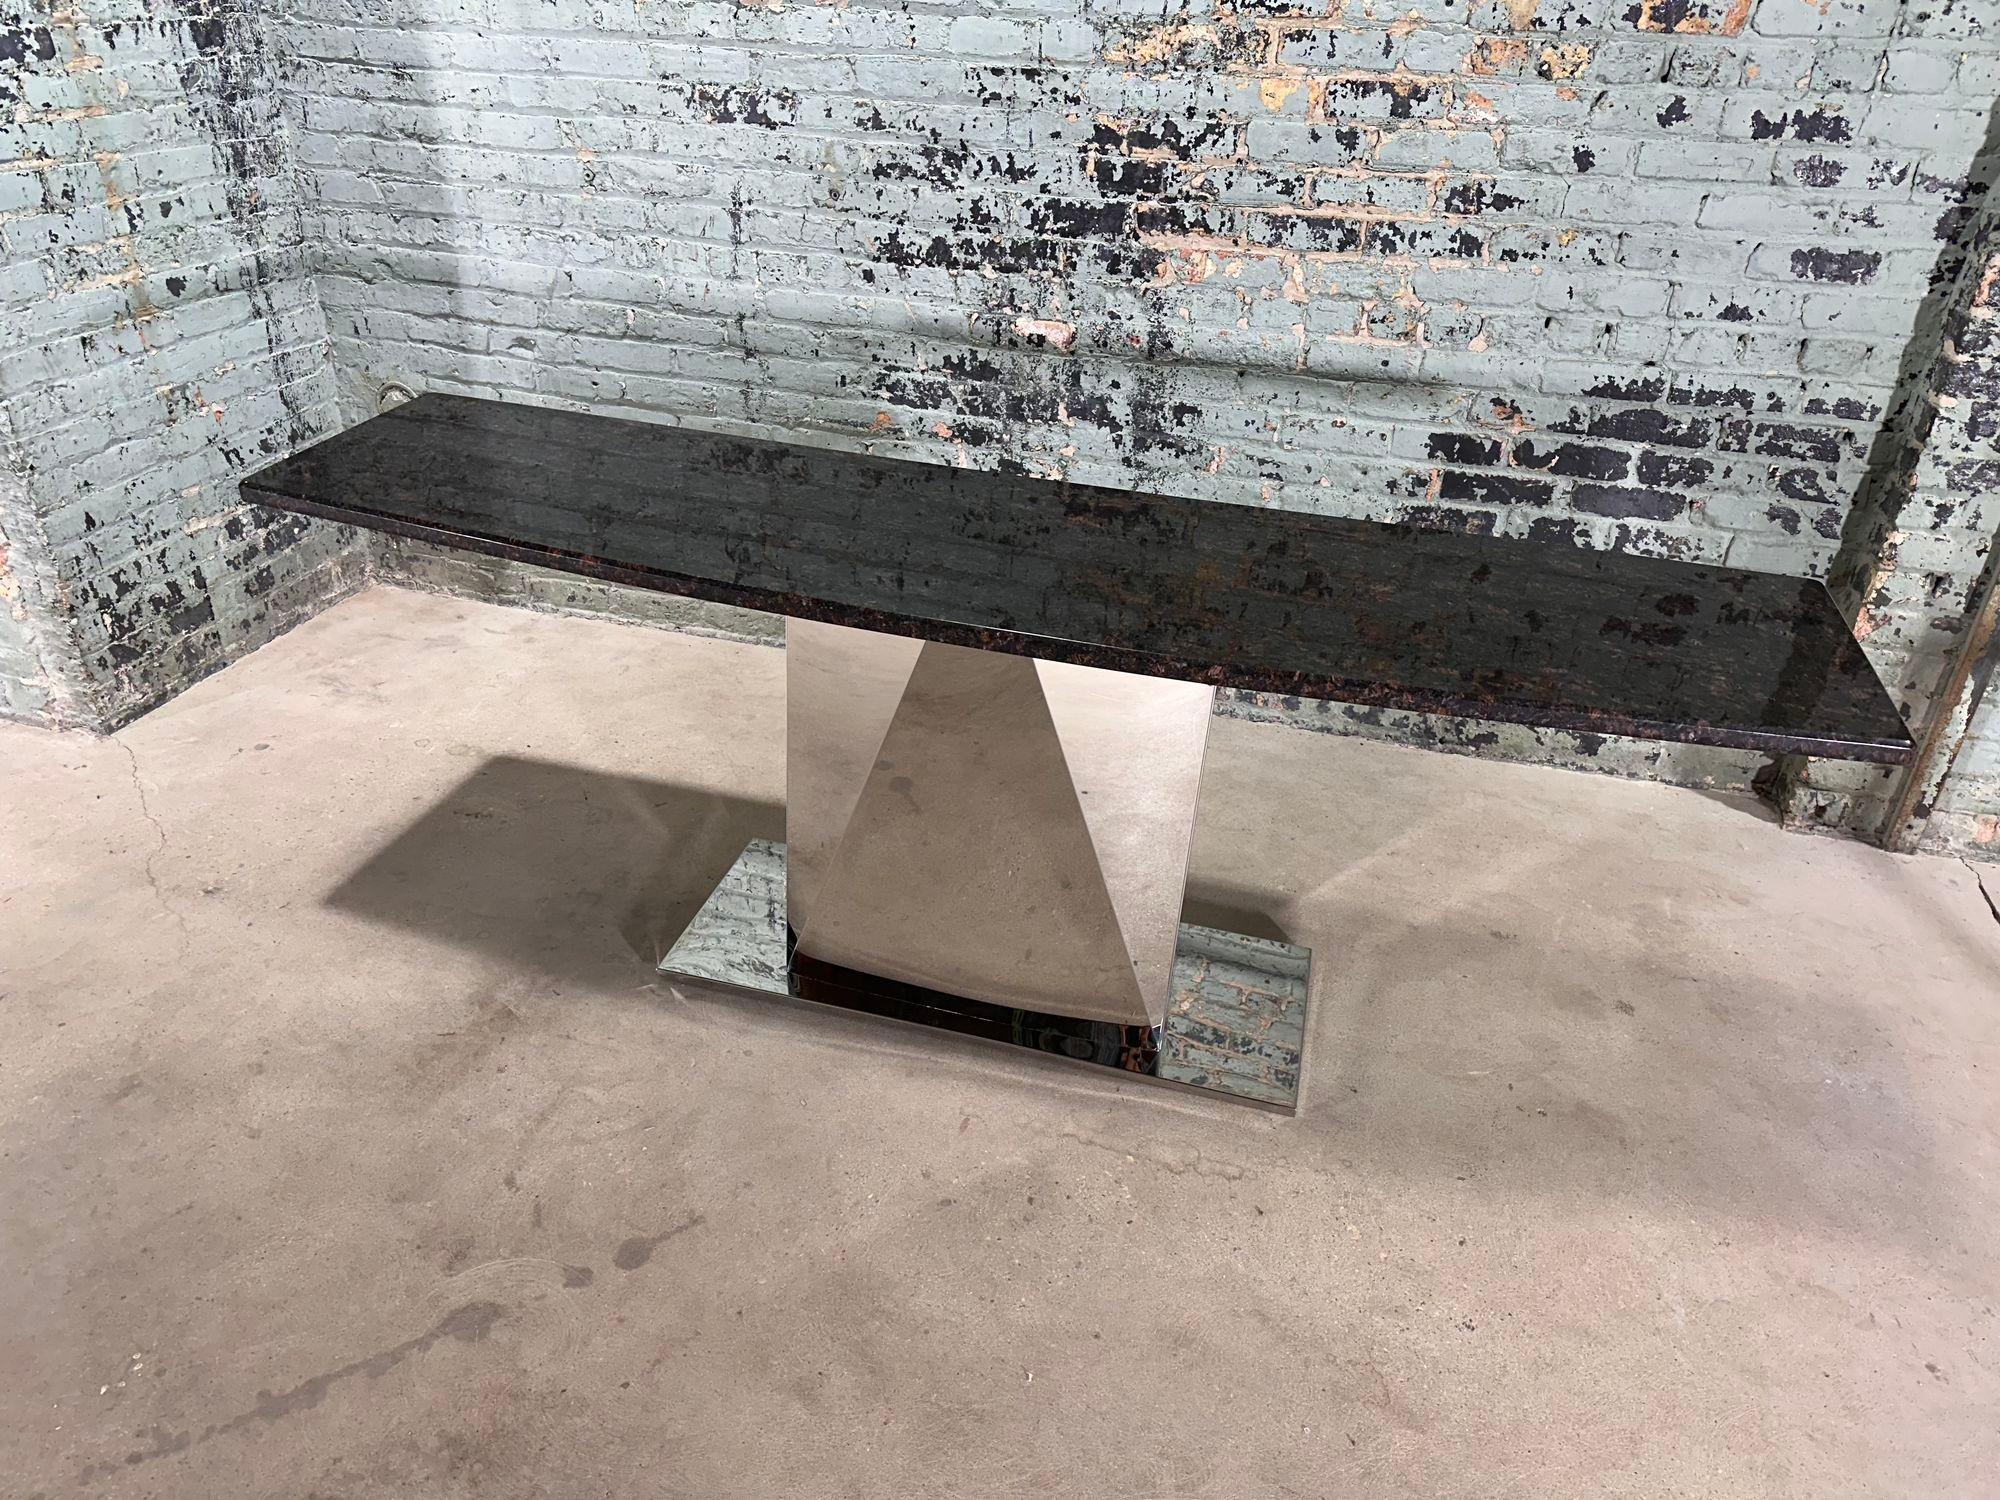 Style of Sally Sirkin Lewis Multi Faceted Stainless Steel and Granite Console, 1970.
Measures 82